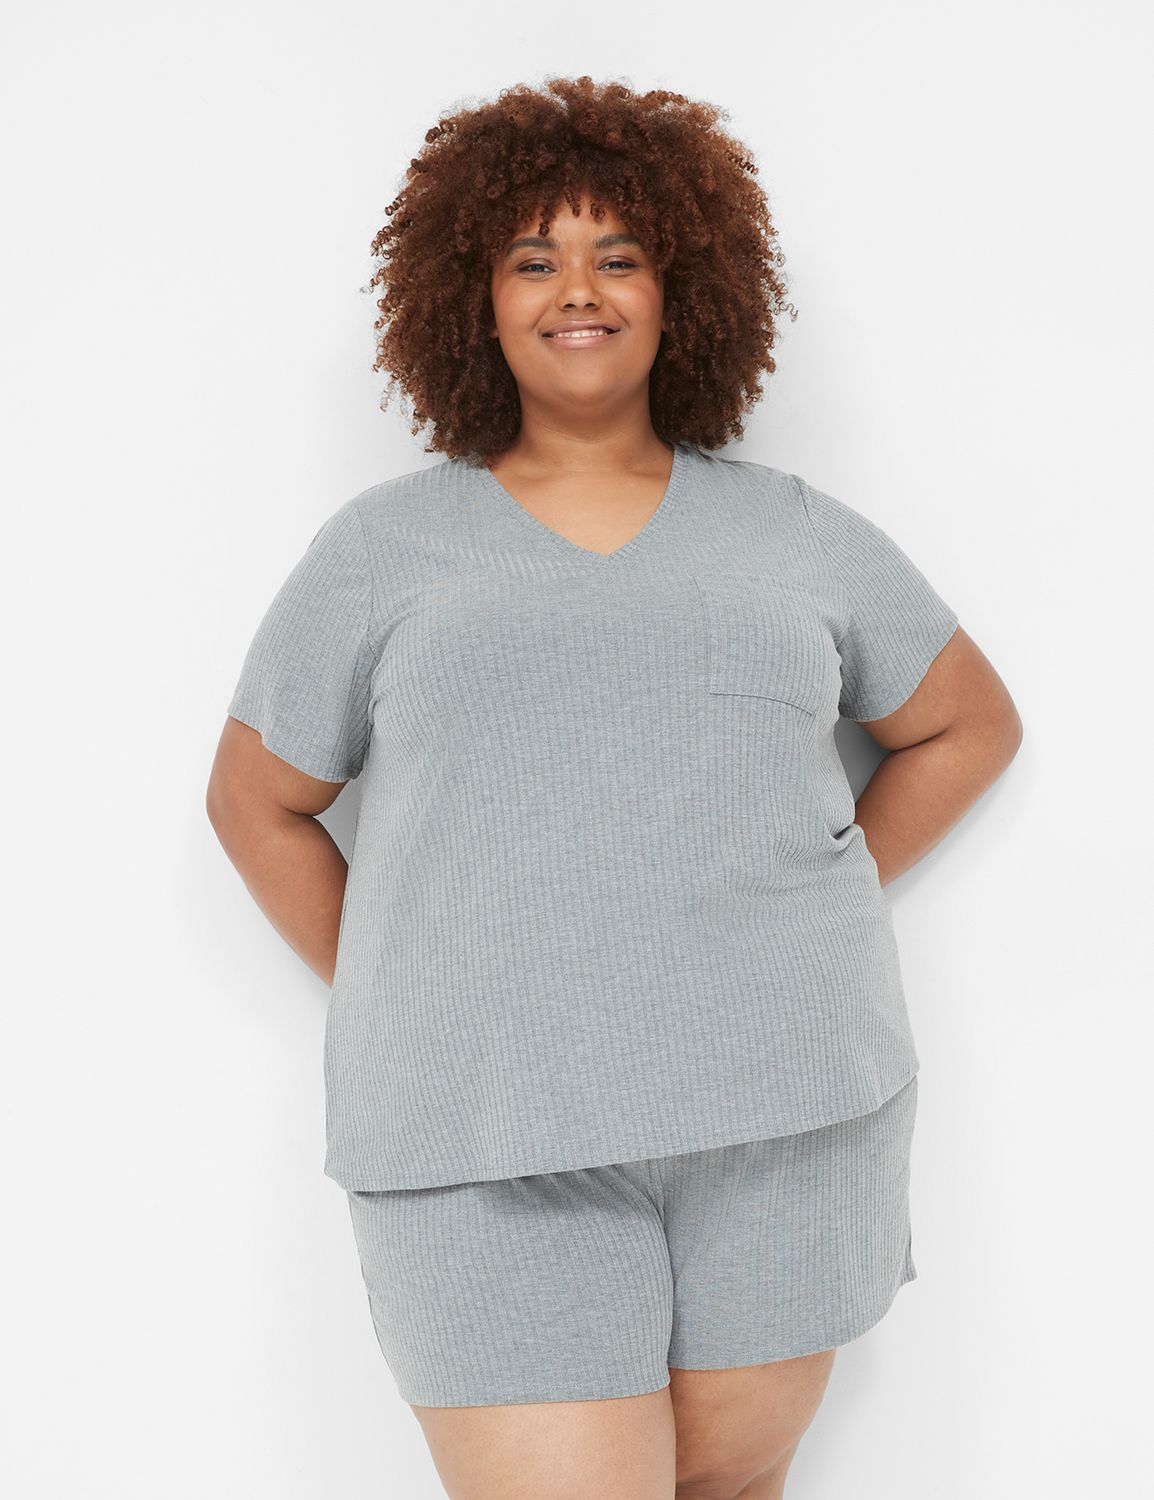 Reel Legends Plus-Sized Clothing On Sale Up To 90% Off Retail